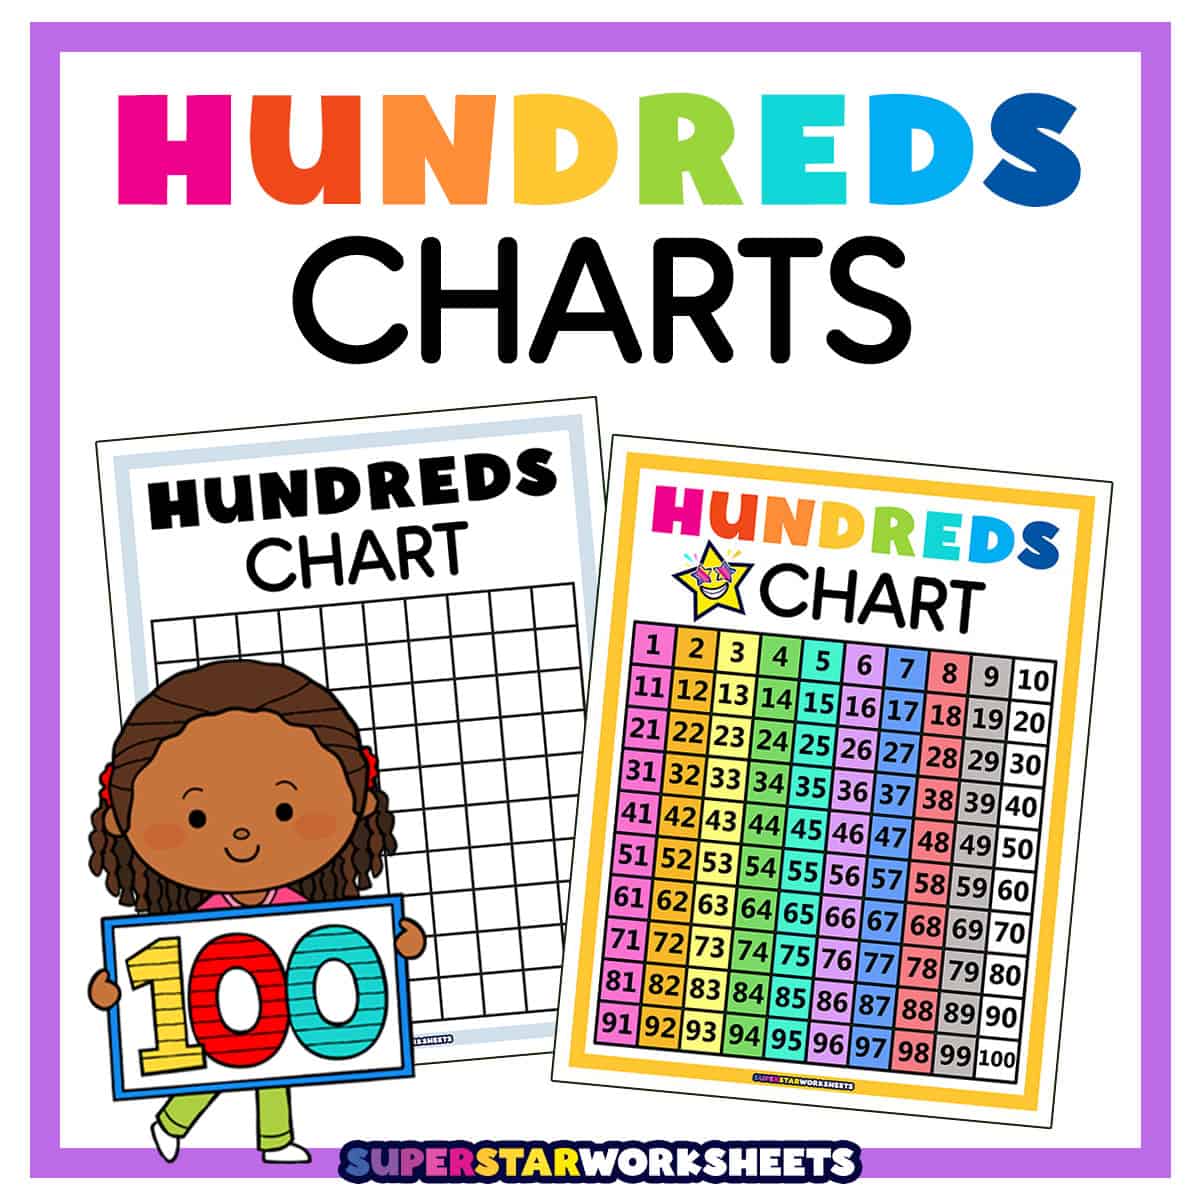 Teach Your Kids Prime Numbers From 1 to 100 - Chart, Tips & Tricks